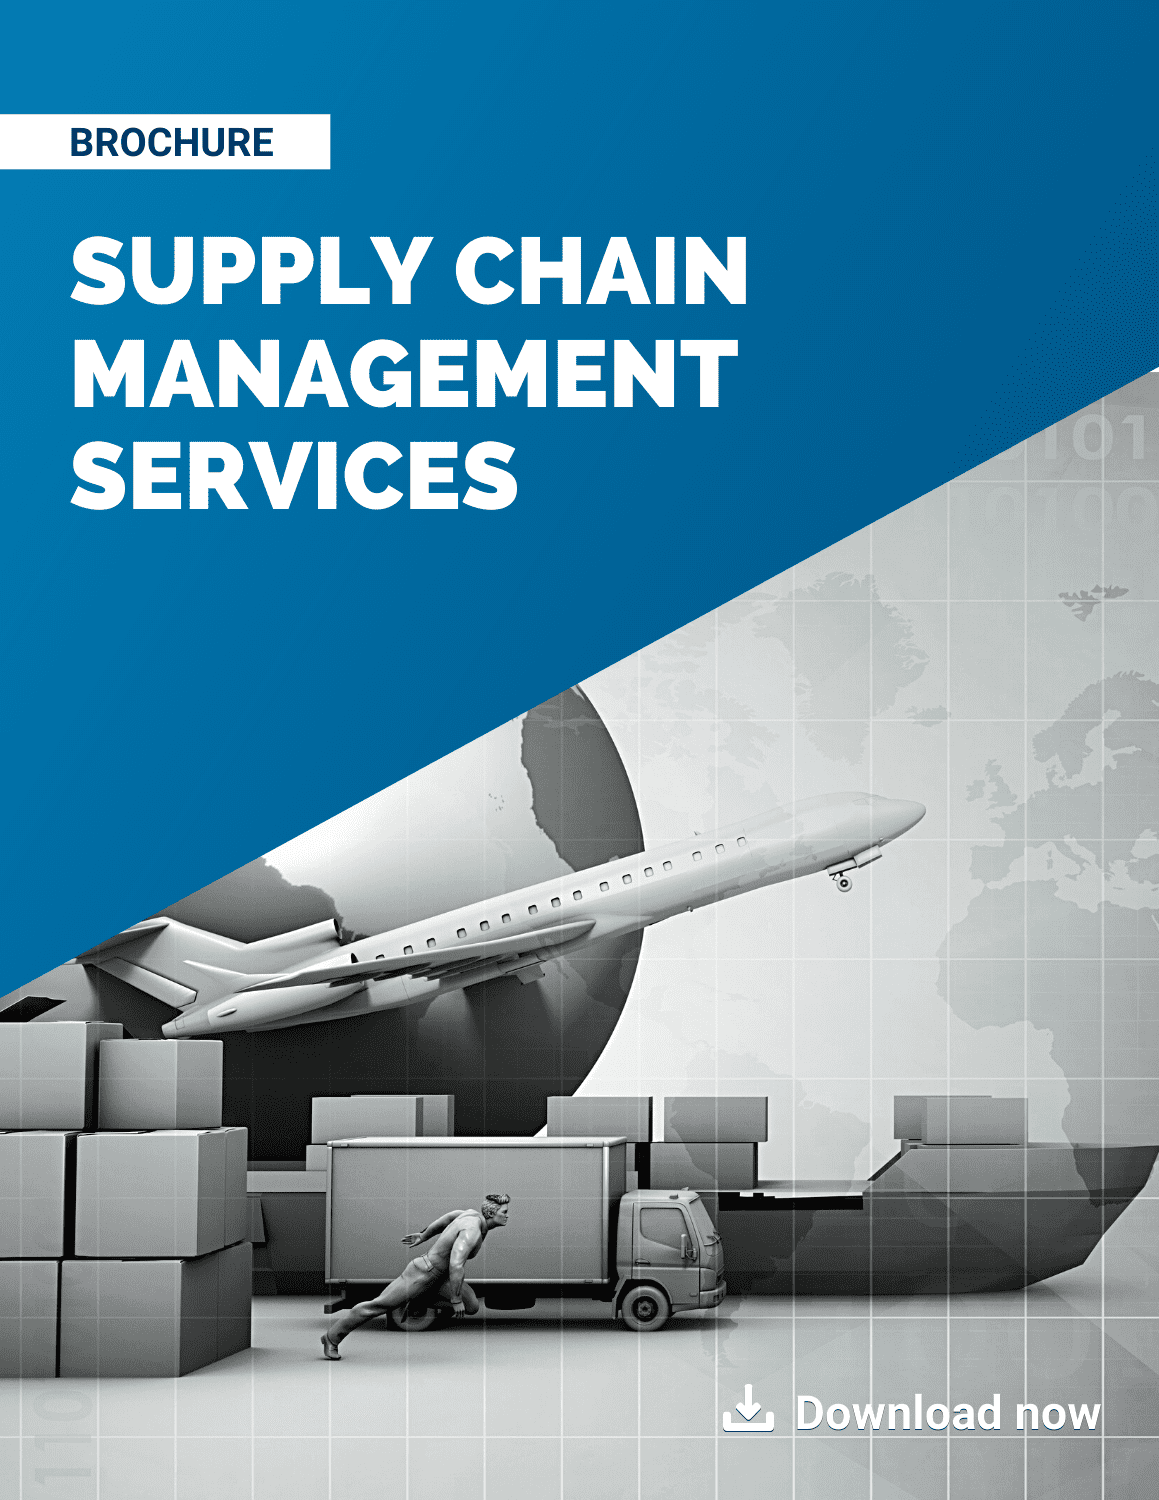 Supply chain management services